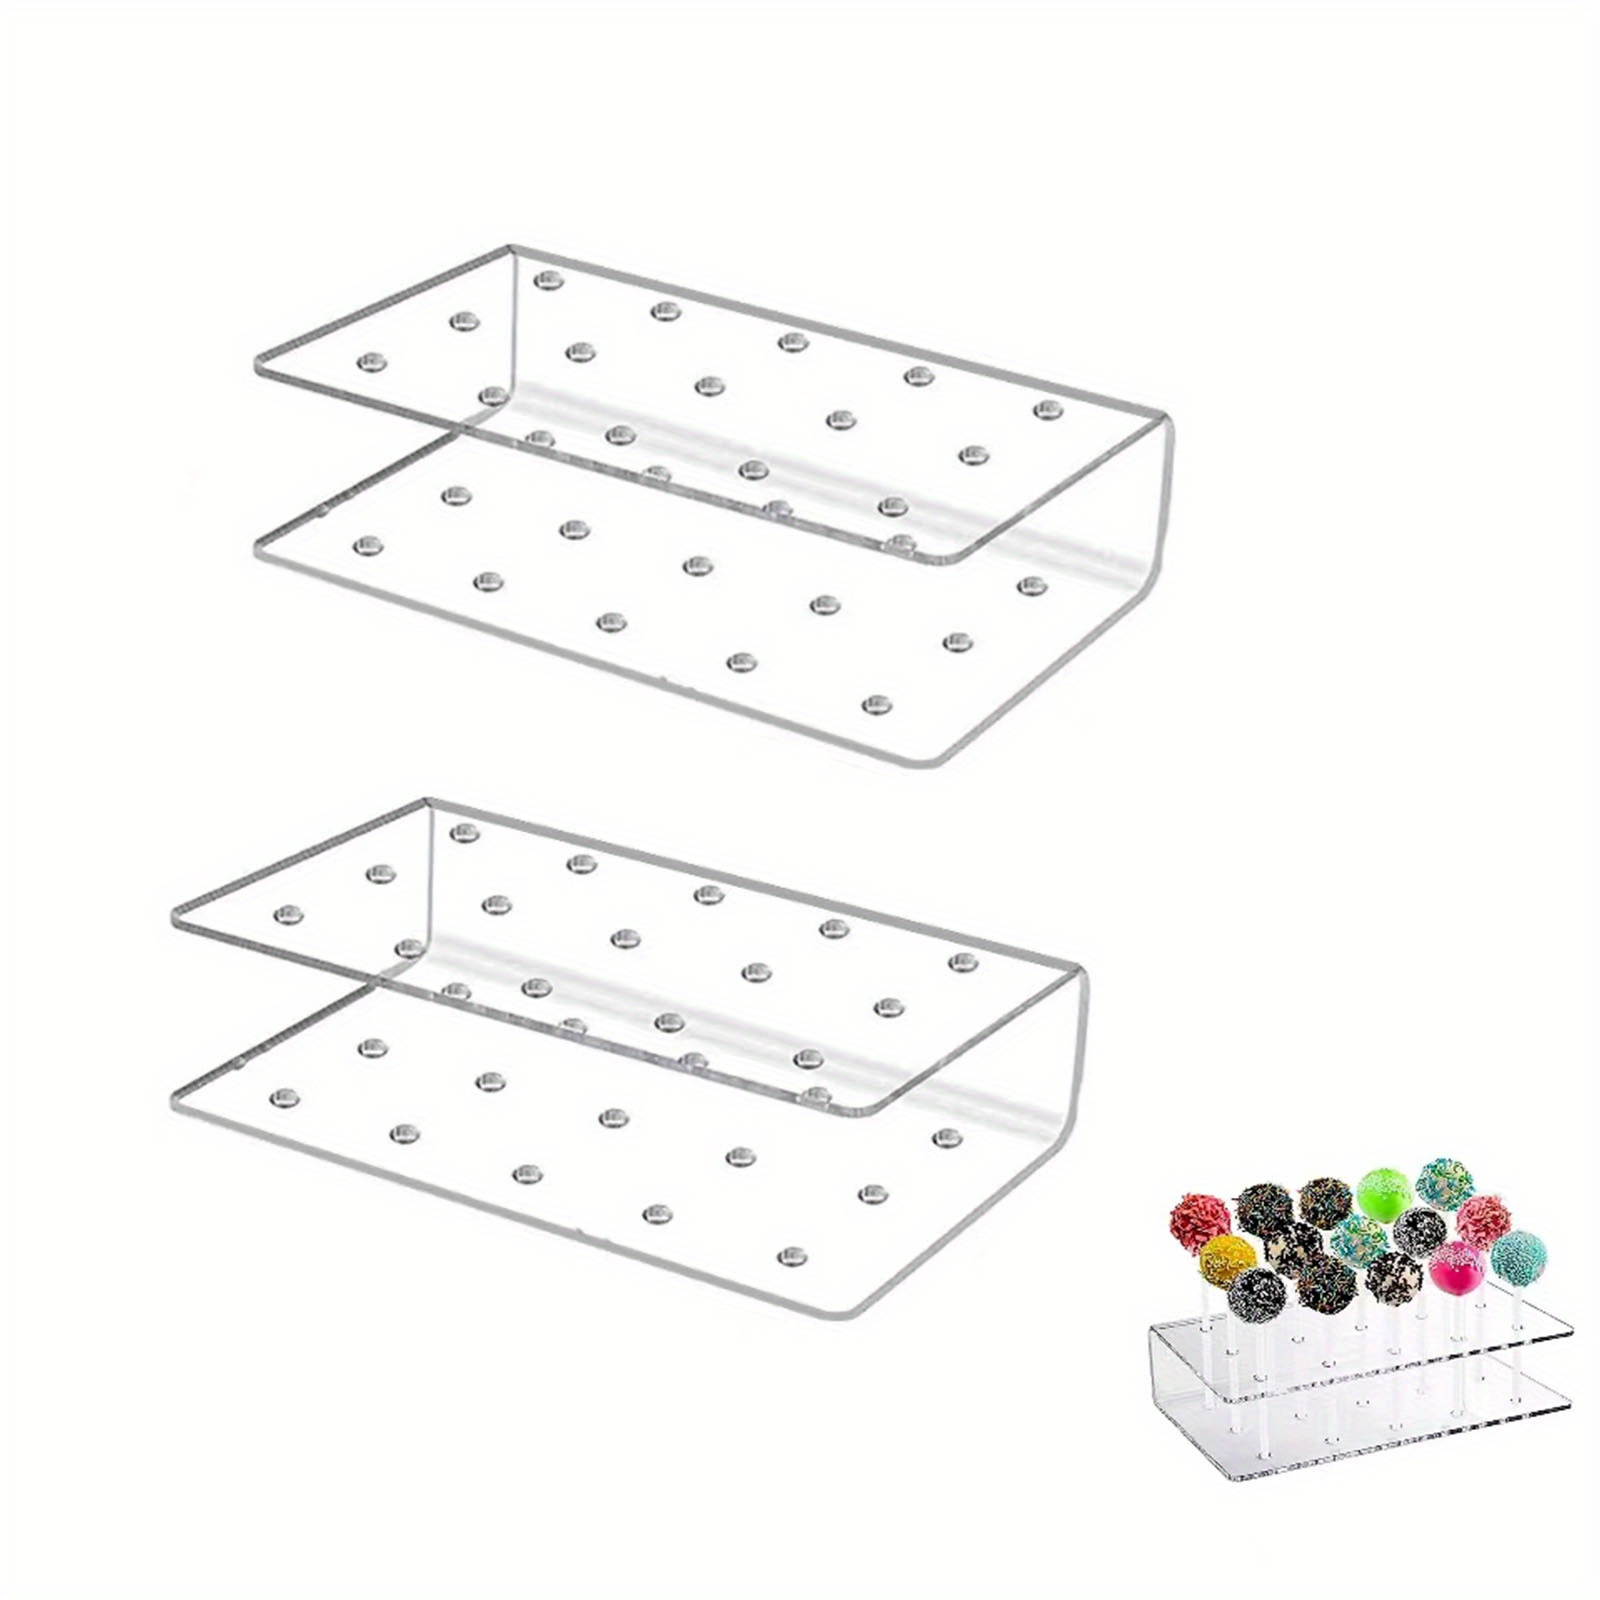 

2pcs 15 Holes Clear Acrylic Lollipop Display Stand, Shelf With Holes, Shop Candy Holder Display Stand, Rectangular Cake Stand, Suitable For Weddings, Birthday Parties, Mother's Day Candy Decorations